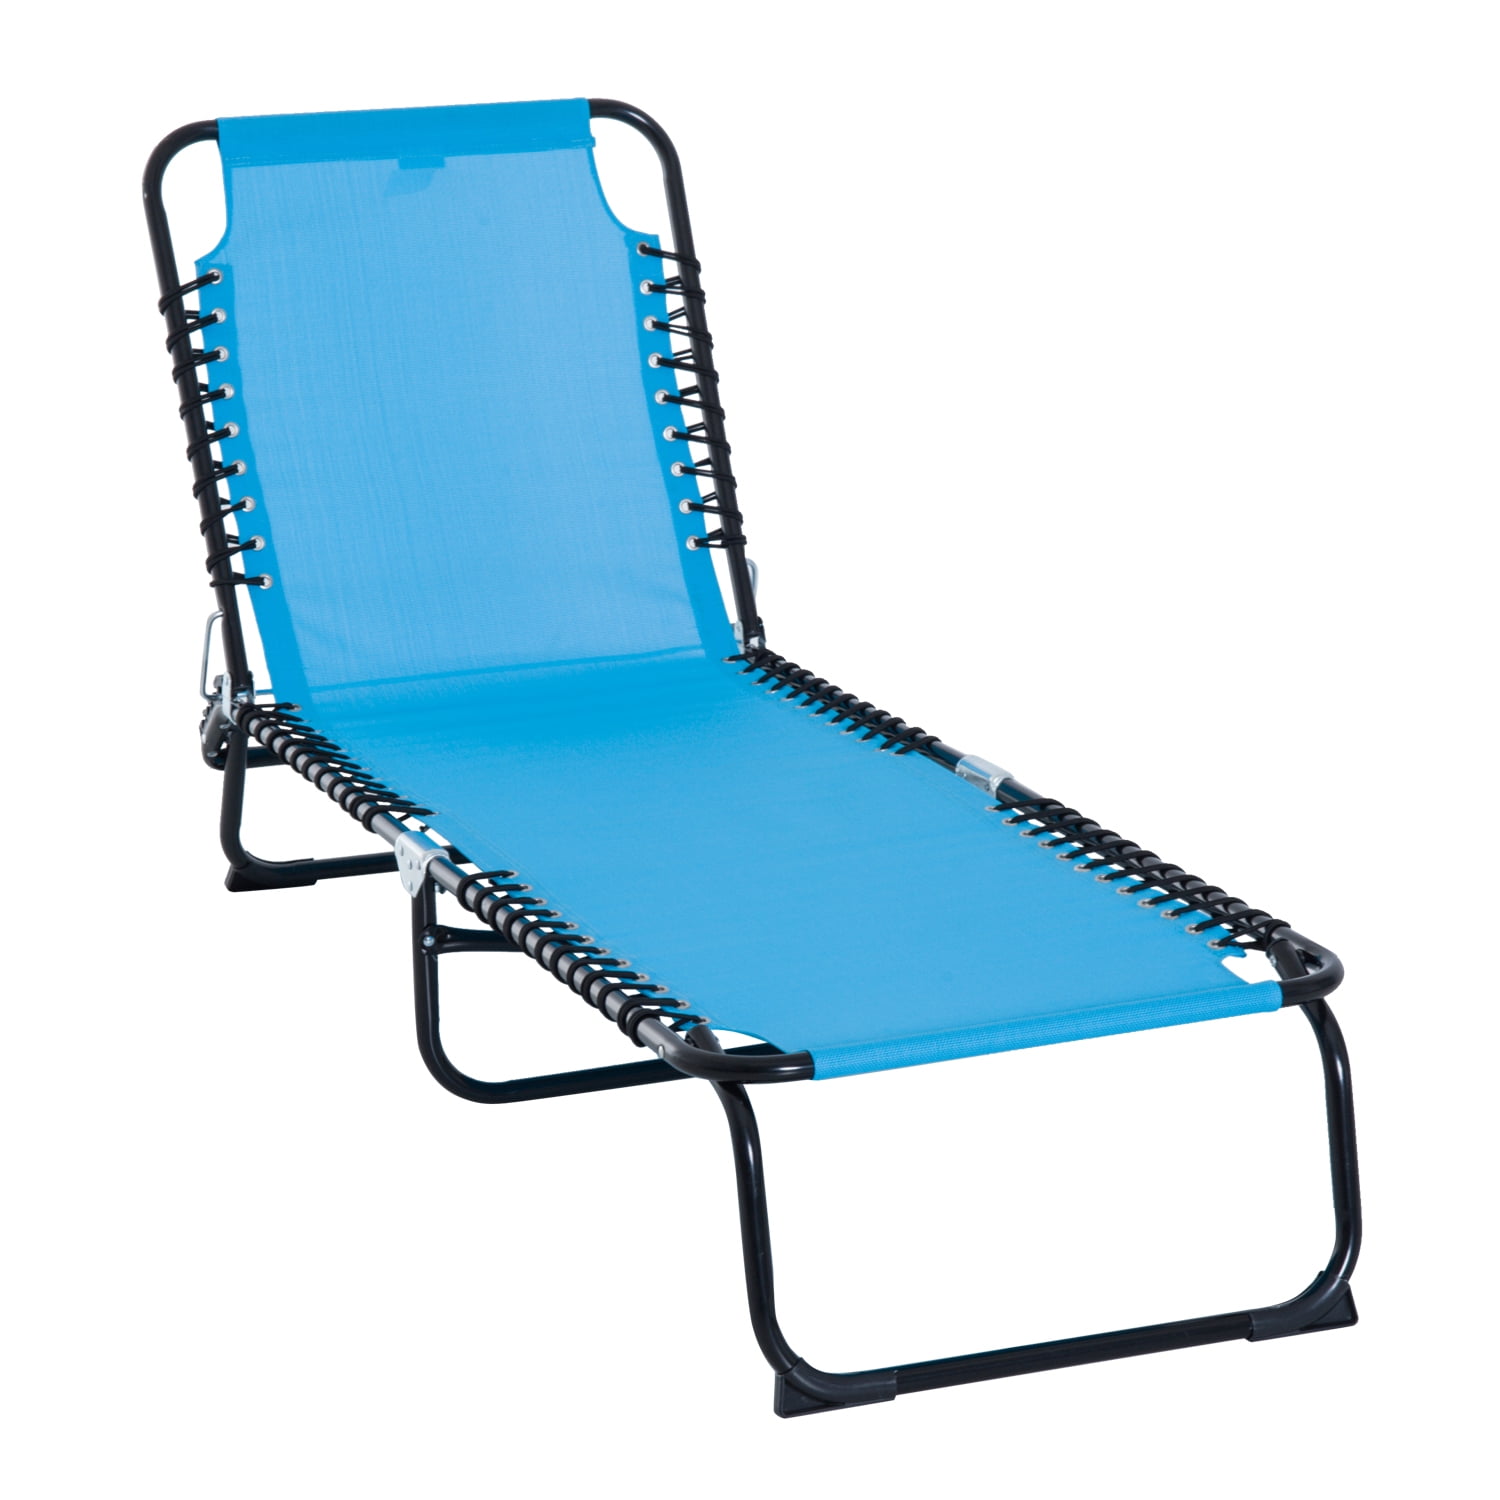 Outsunny Folding Chaise Lounge Chair Reclining Garden Sun Lounger With 3 Position Adjustable Backrest For Patio Deck And Poolside Light Blue, Portable Patio Lounge Chairs